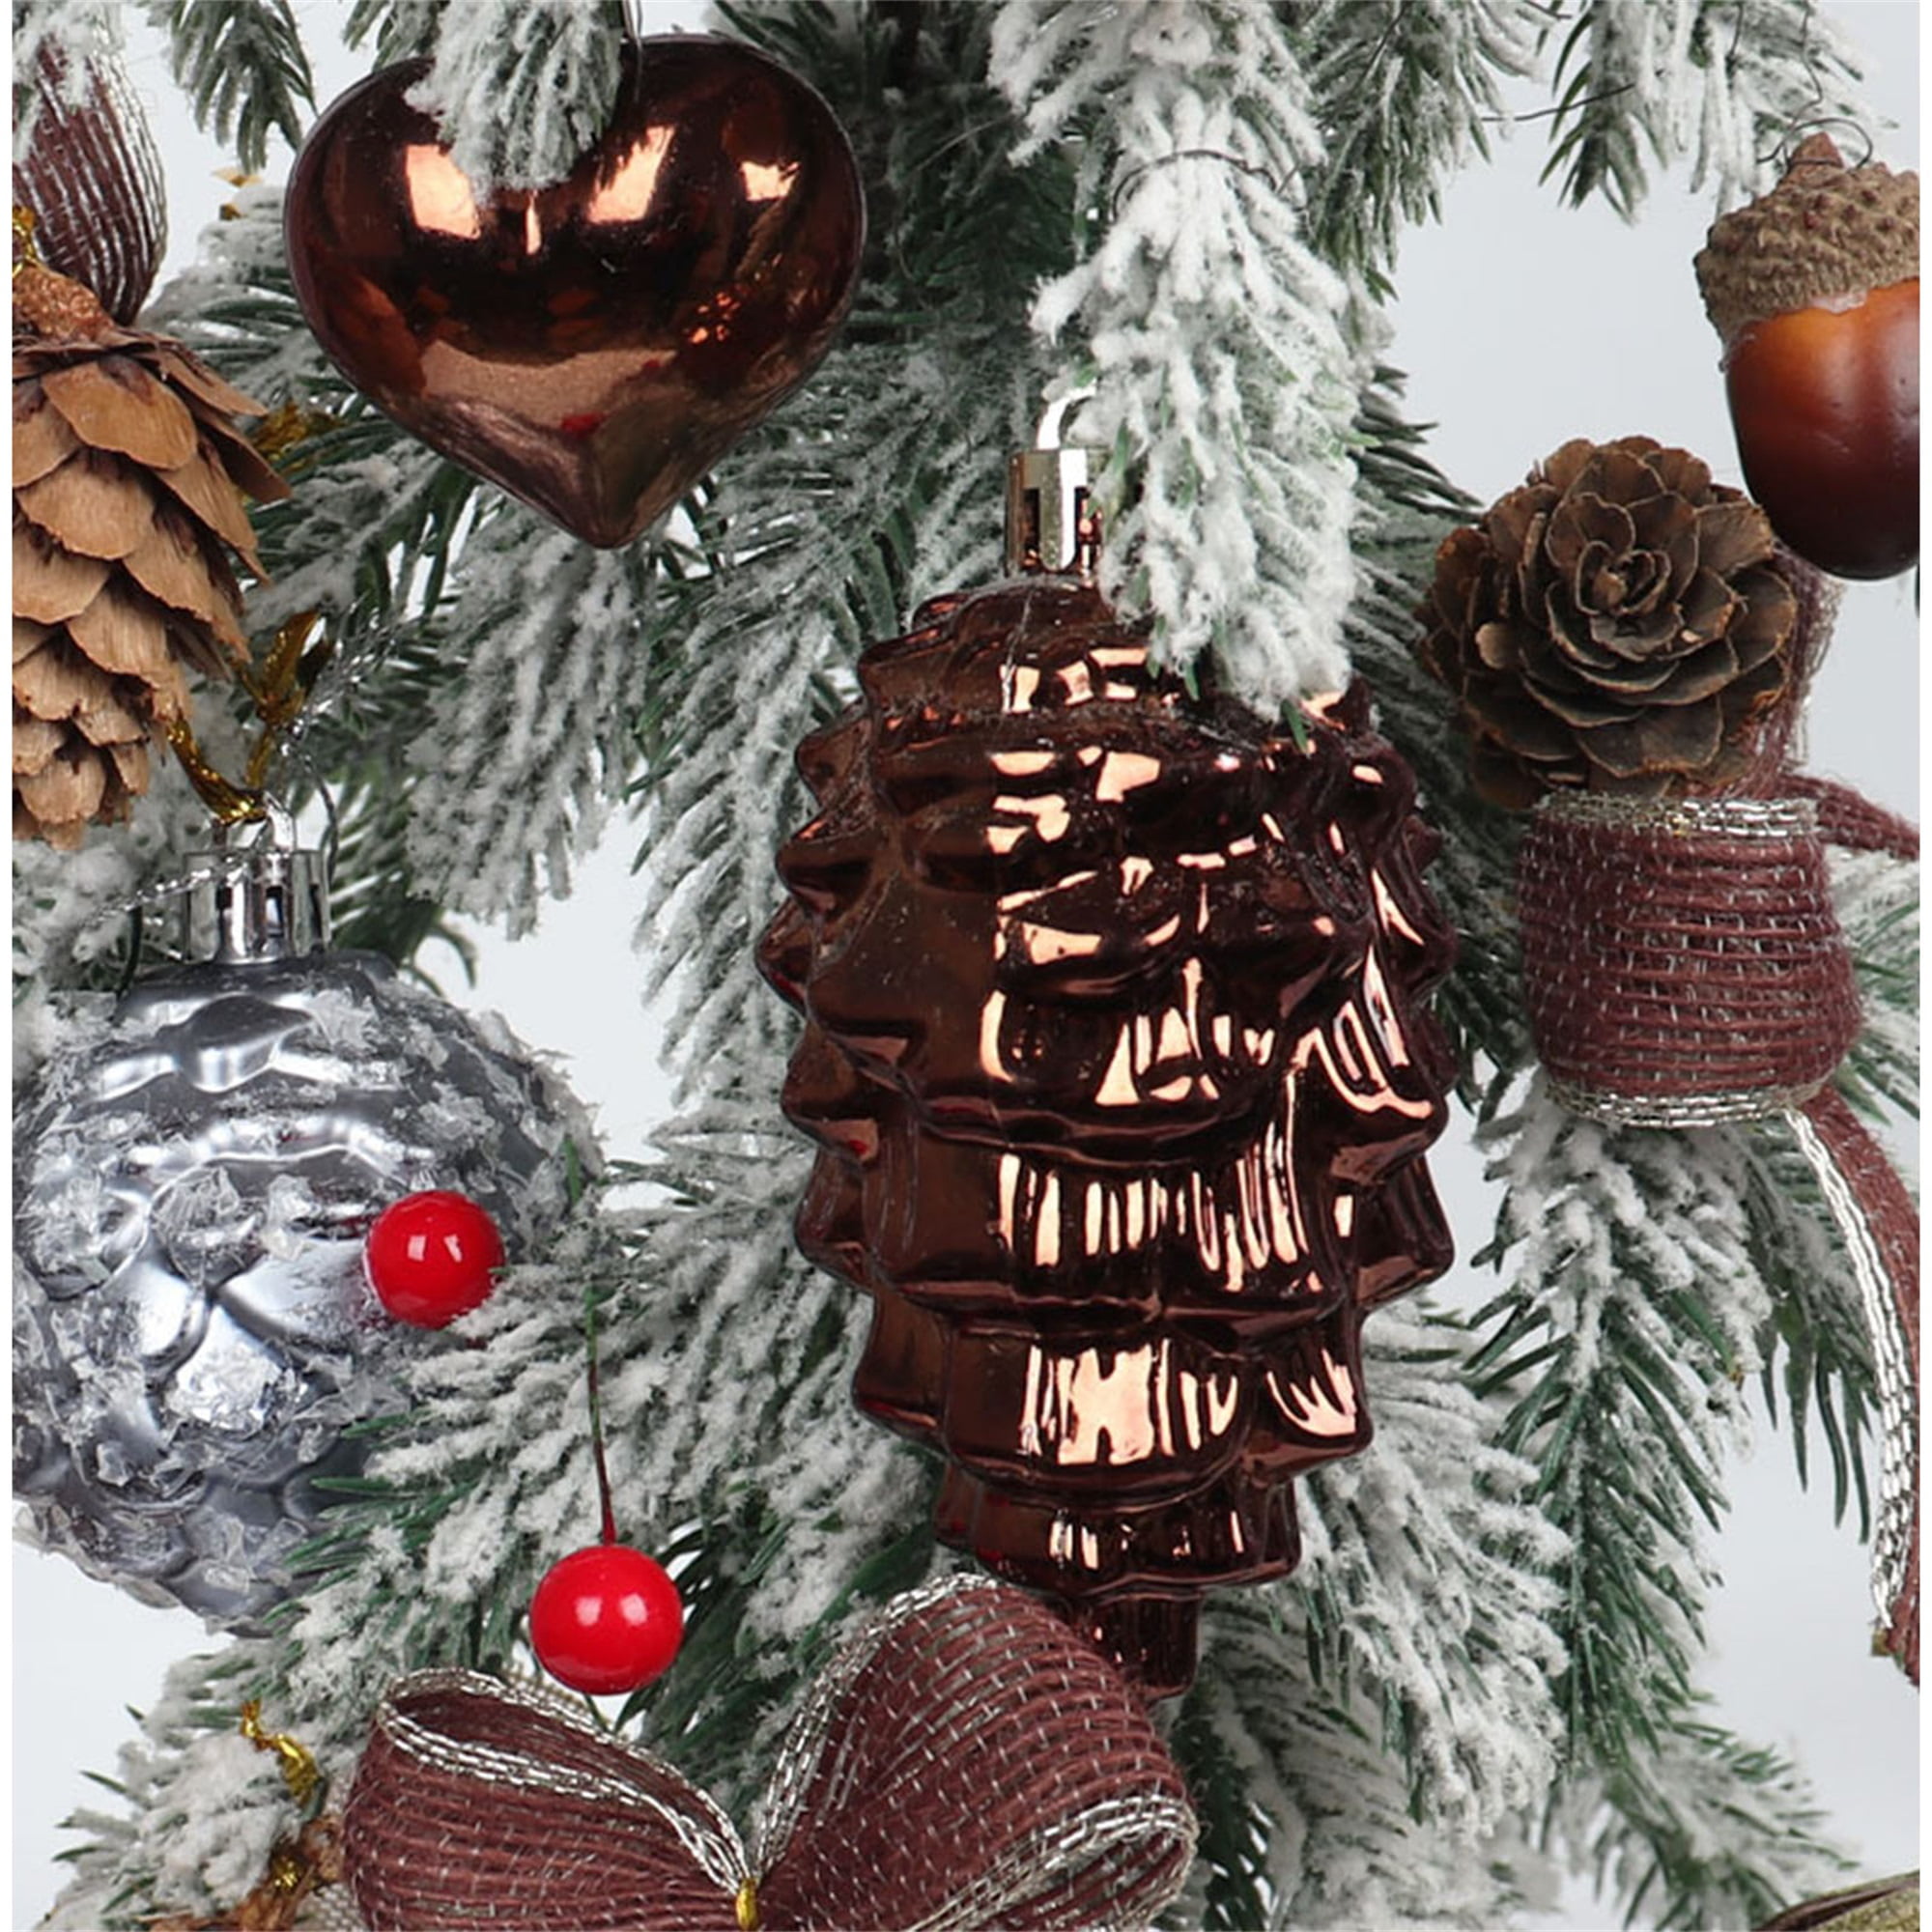 30 Pieces Real Natural Small Pine Cones Decorative Pinecone Bauble Xmas  Tree Party Hanging Ornament Xmas Decoration - Christmas Pendant & Drop  Ornaments - AliExpress